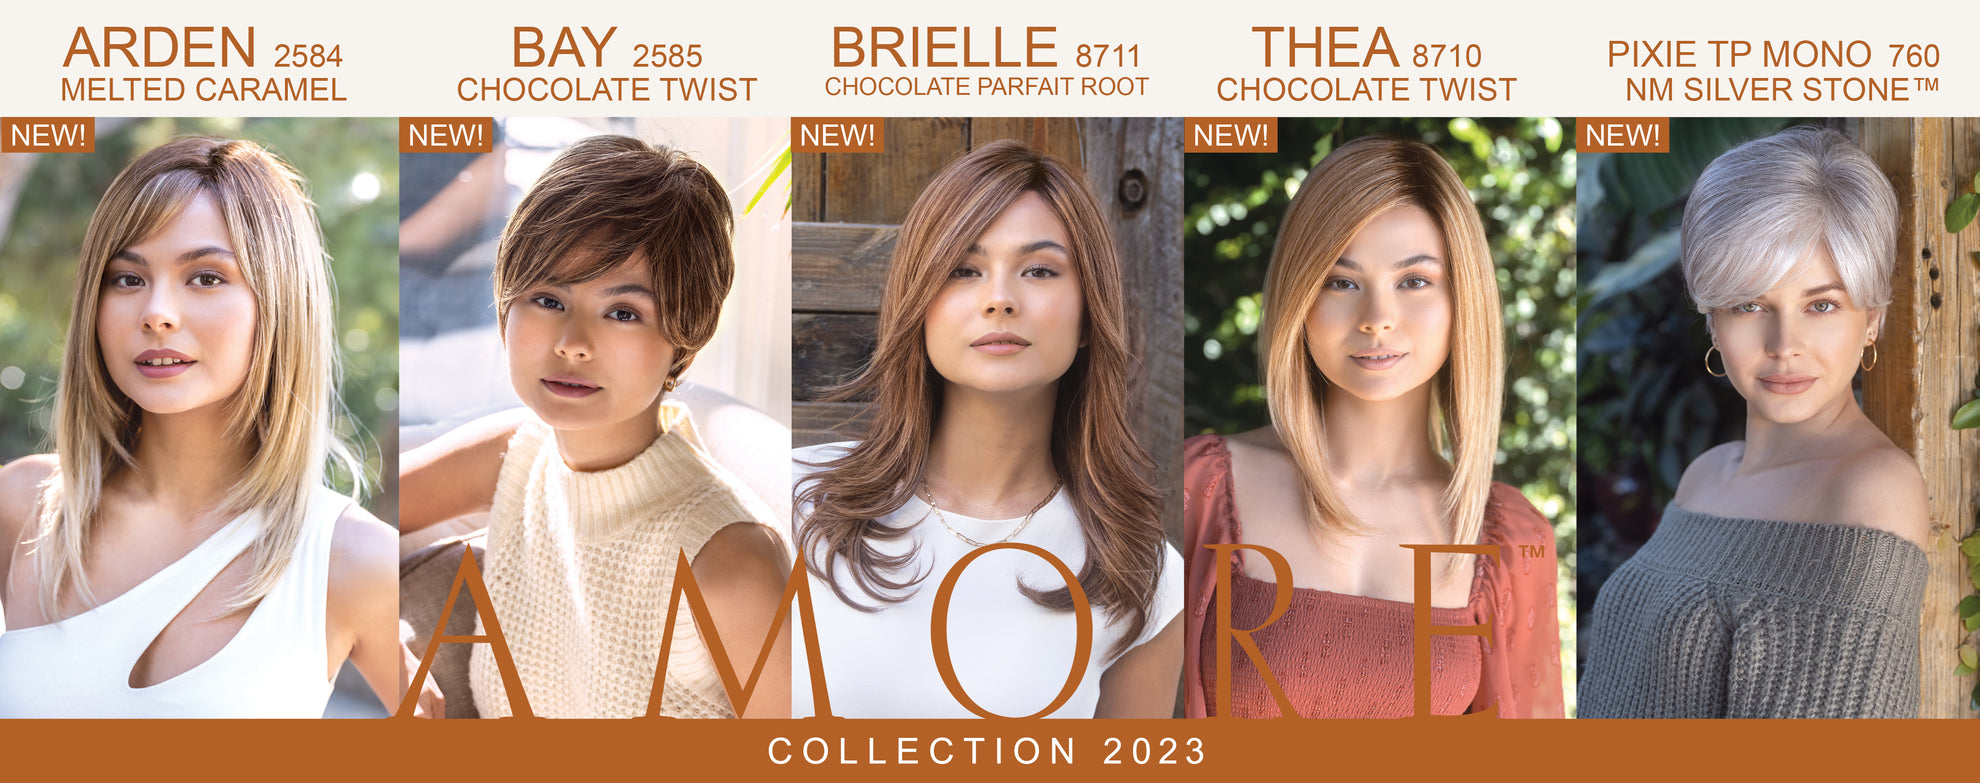 Amore Collection 2023